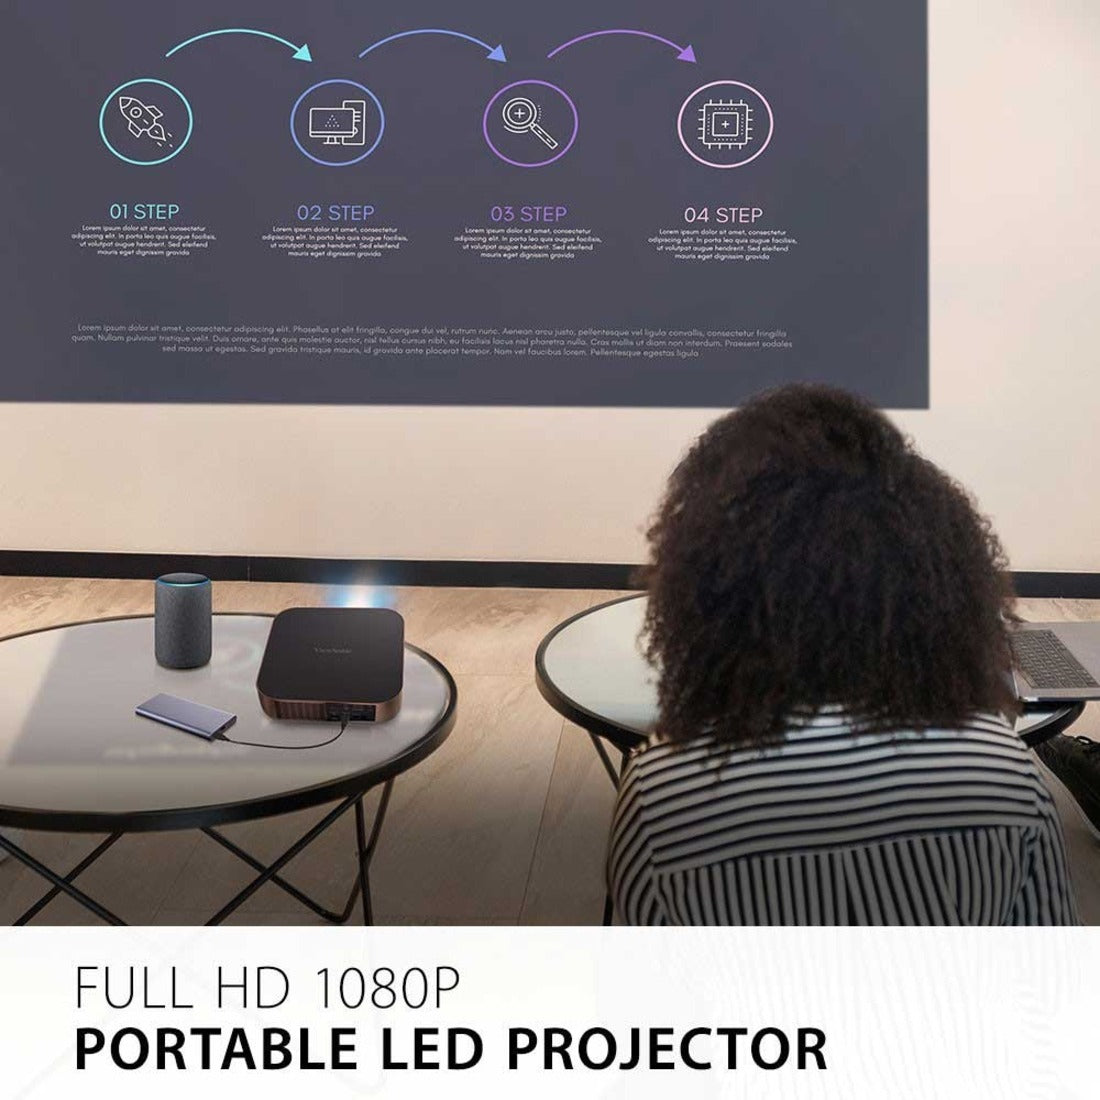 ViewSonic Portable 1080p Wireless Ultra-slim LED Projector [Discontinued]